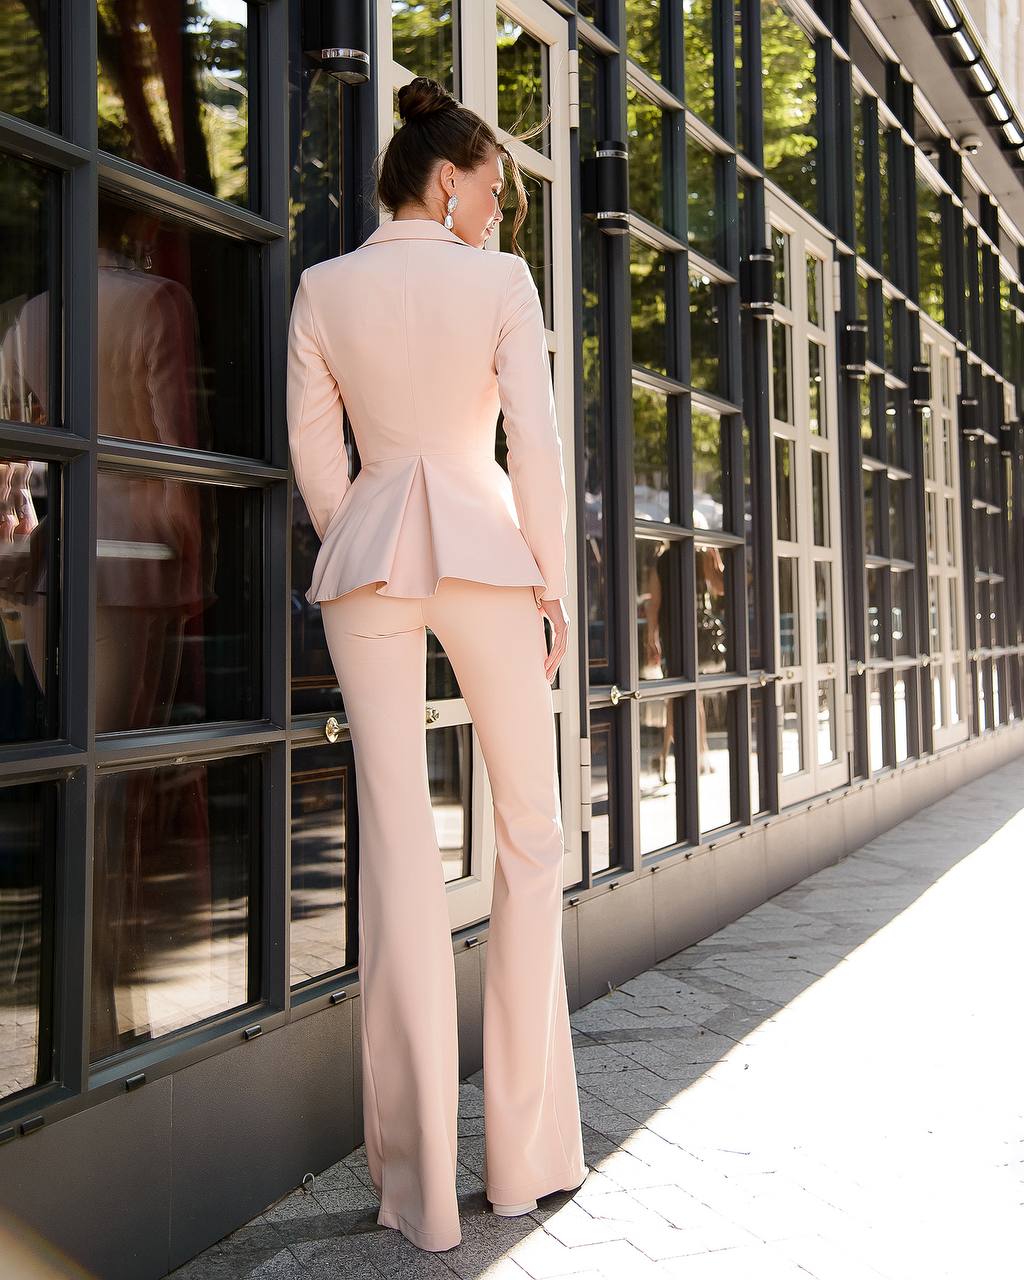 a woman in a pink suit leaning against a building